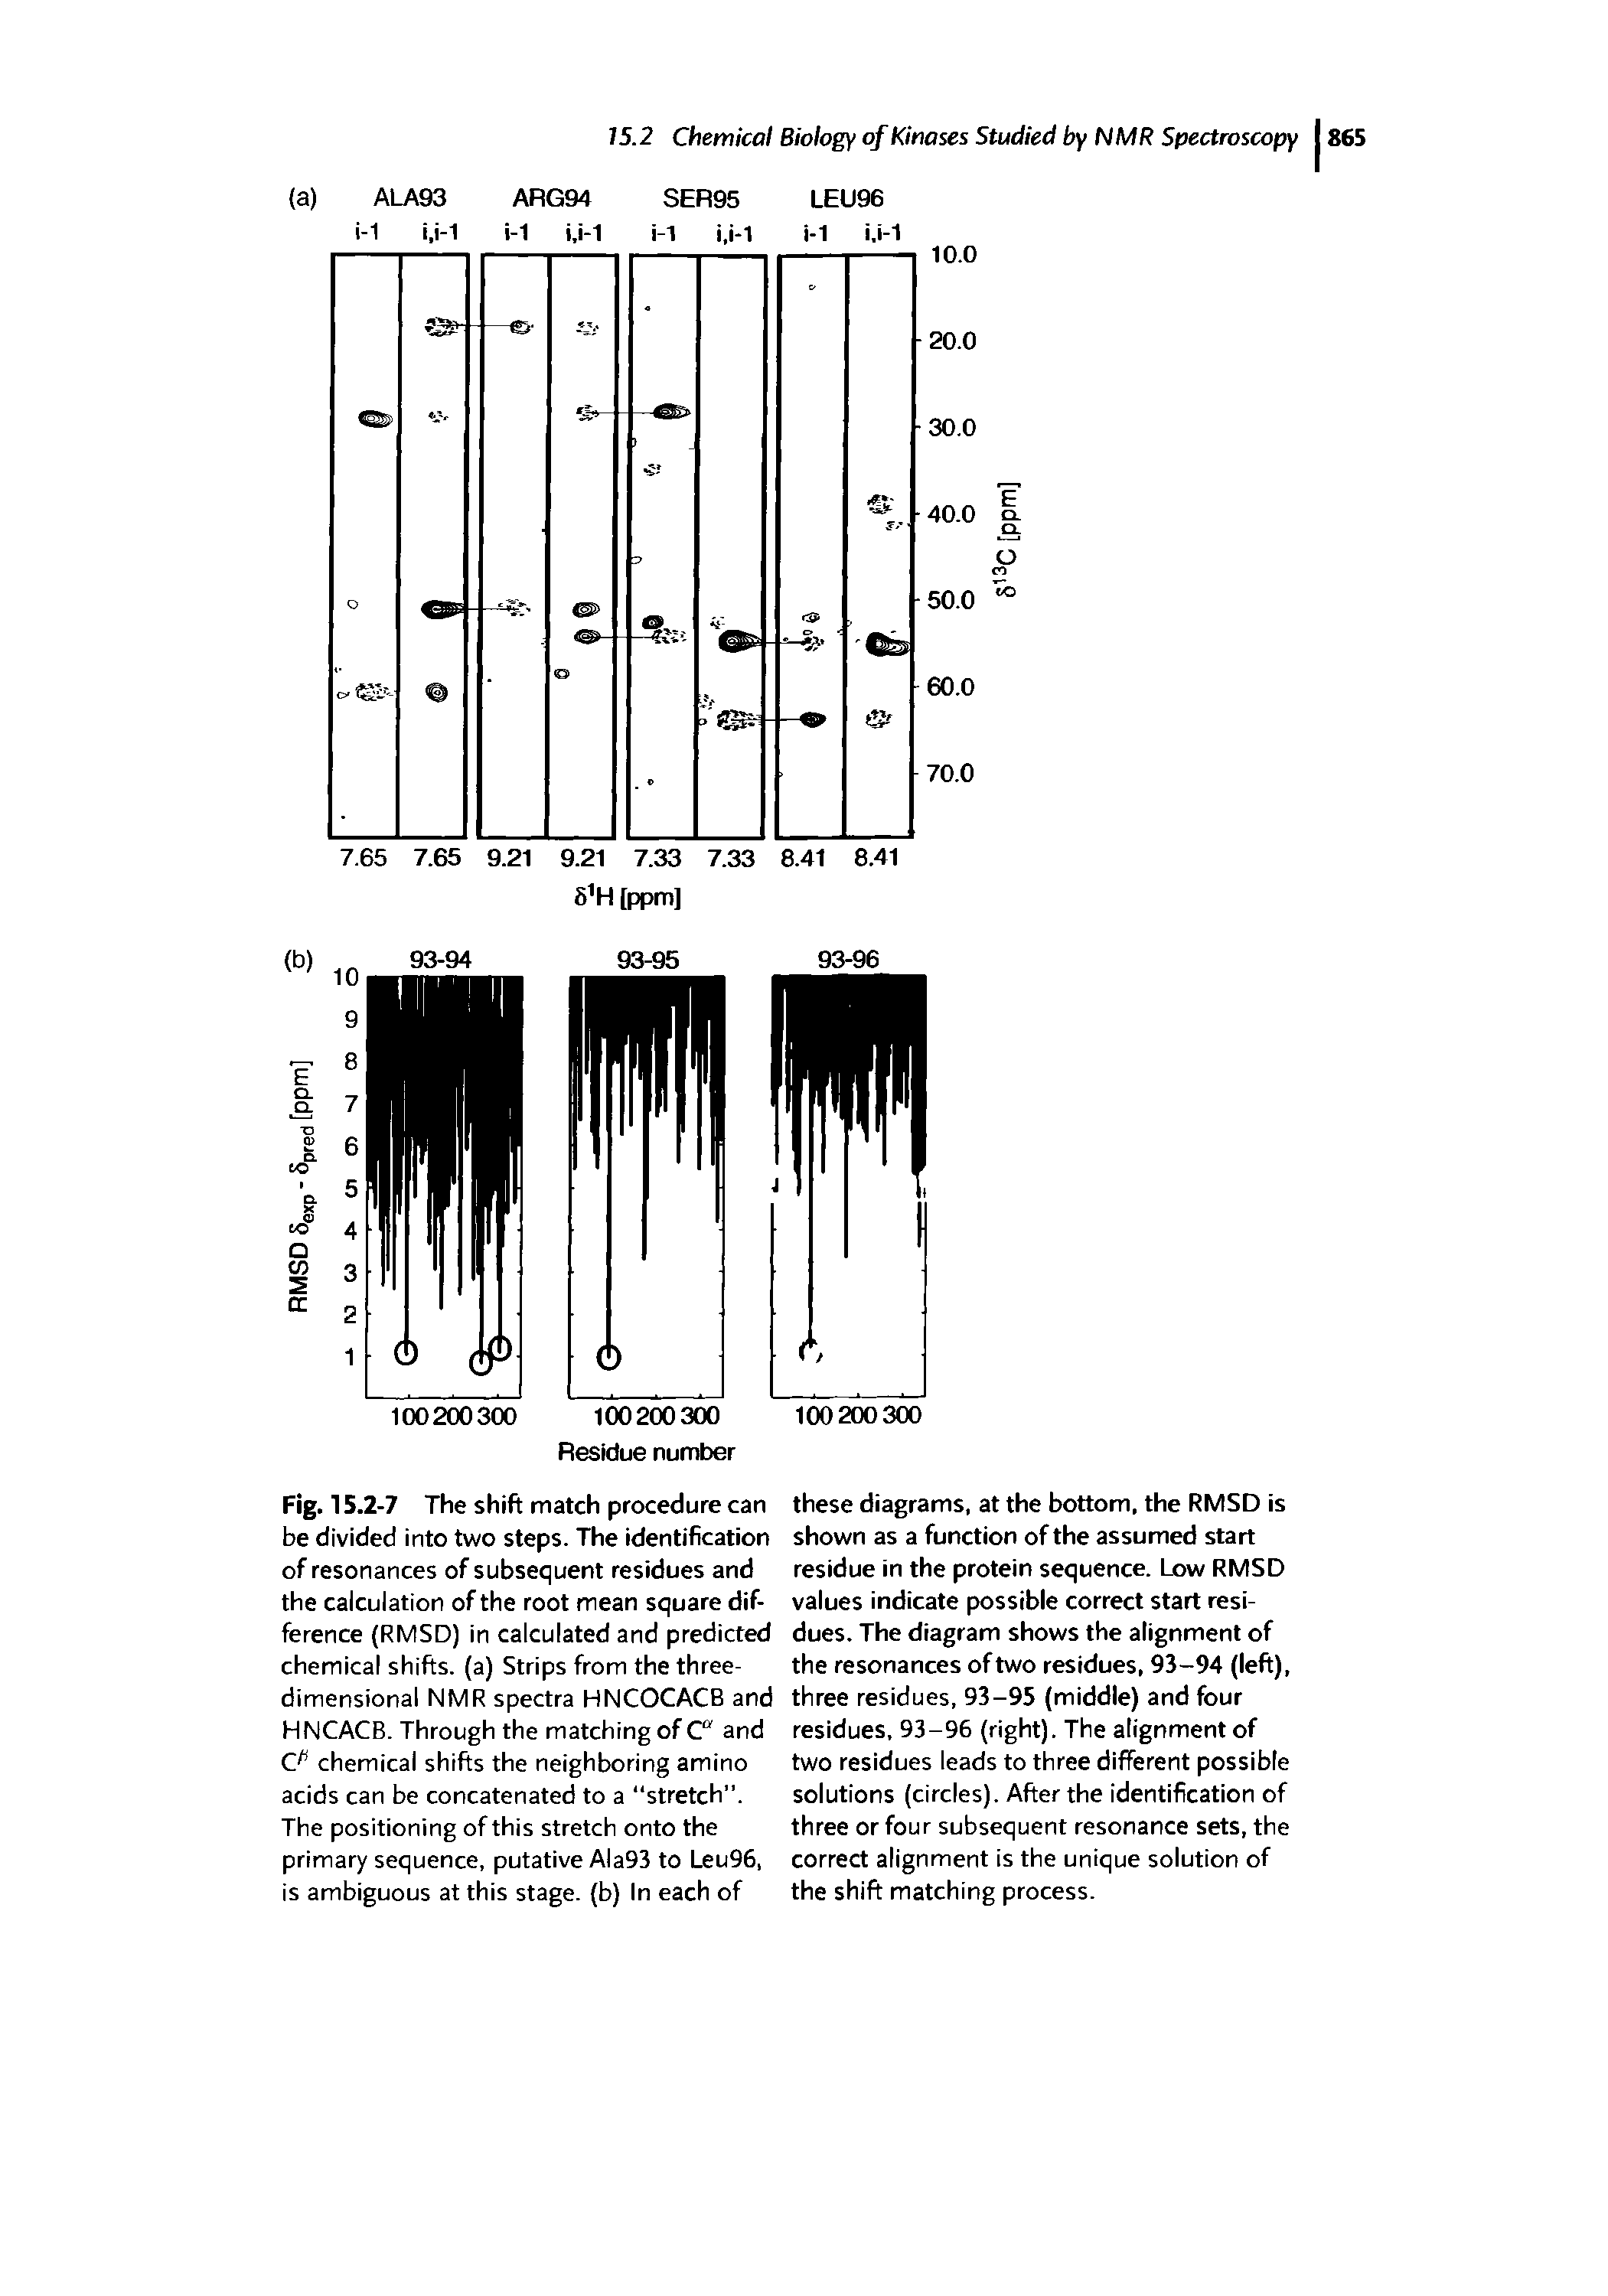 Fig. 15.2-7 The shift match procedure can be divided into two steps. The identification of resonances of subsequent residues and the calculation of the root mean square difference (RMSD) in calculated and predicted chemical shifts, (a) Strips from the three-dimensional NMR spectra HNCOCACB and HNCACB. Through the matching of C and (T chemical shifts the neighboring amino acids can be concatenated to a "stretch . The positioning of this stretch onto the primary sequence, putative Ala93 to Leu96, is ambiguous at this stage, (b) In each of...